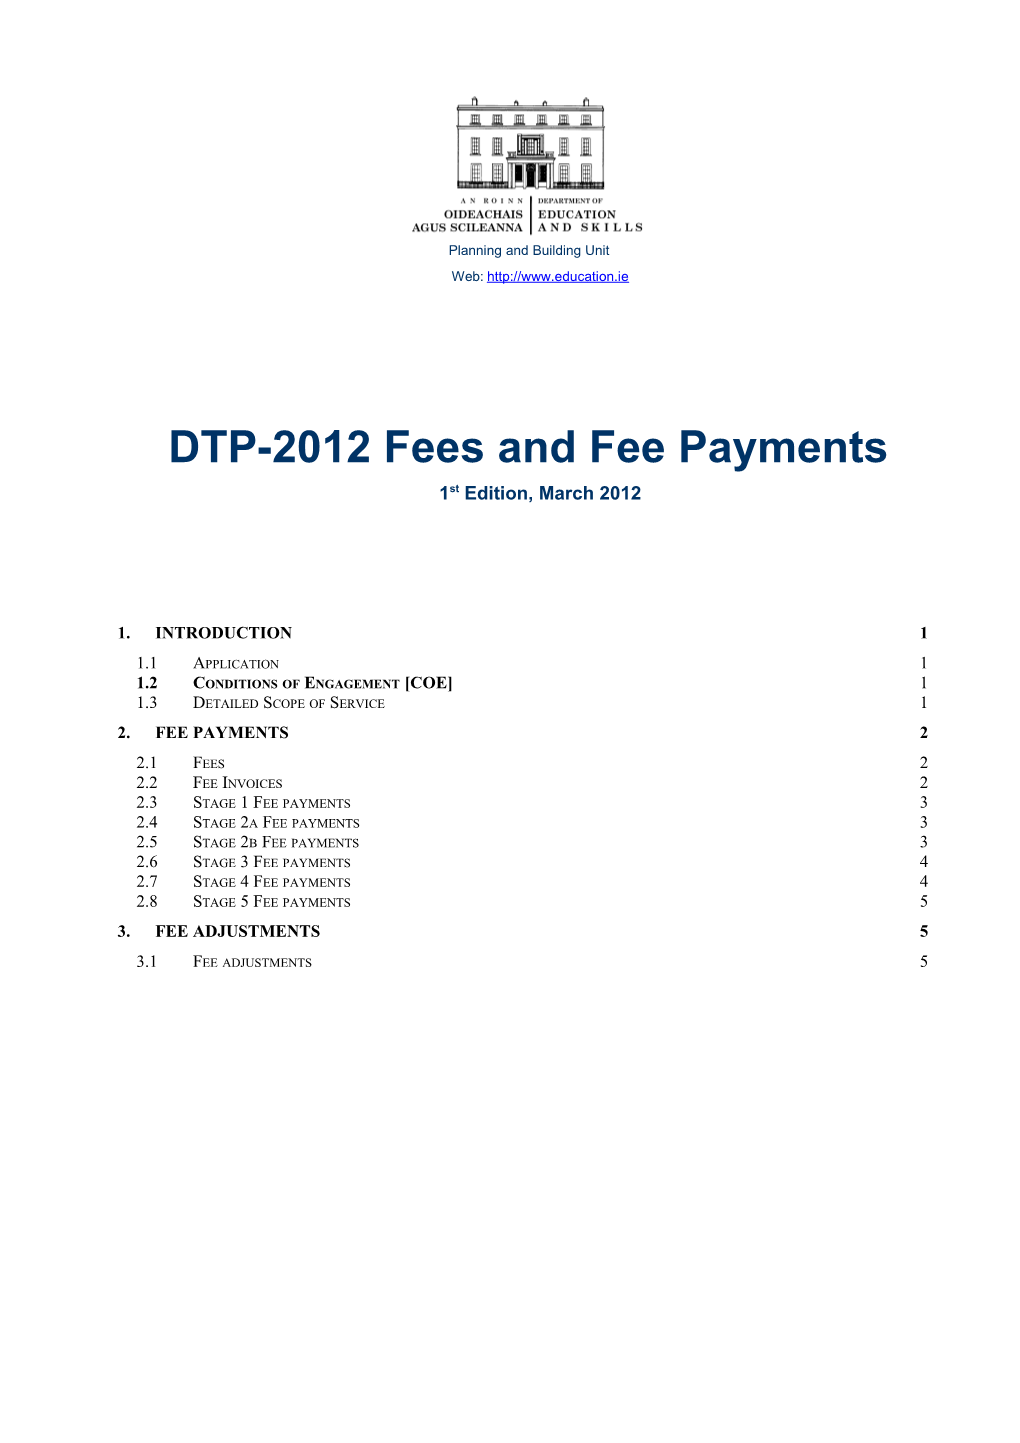 DTP-2012 Fees and Fee Payments 1St Edition March 2012